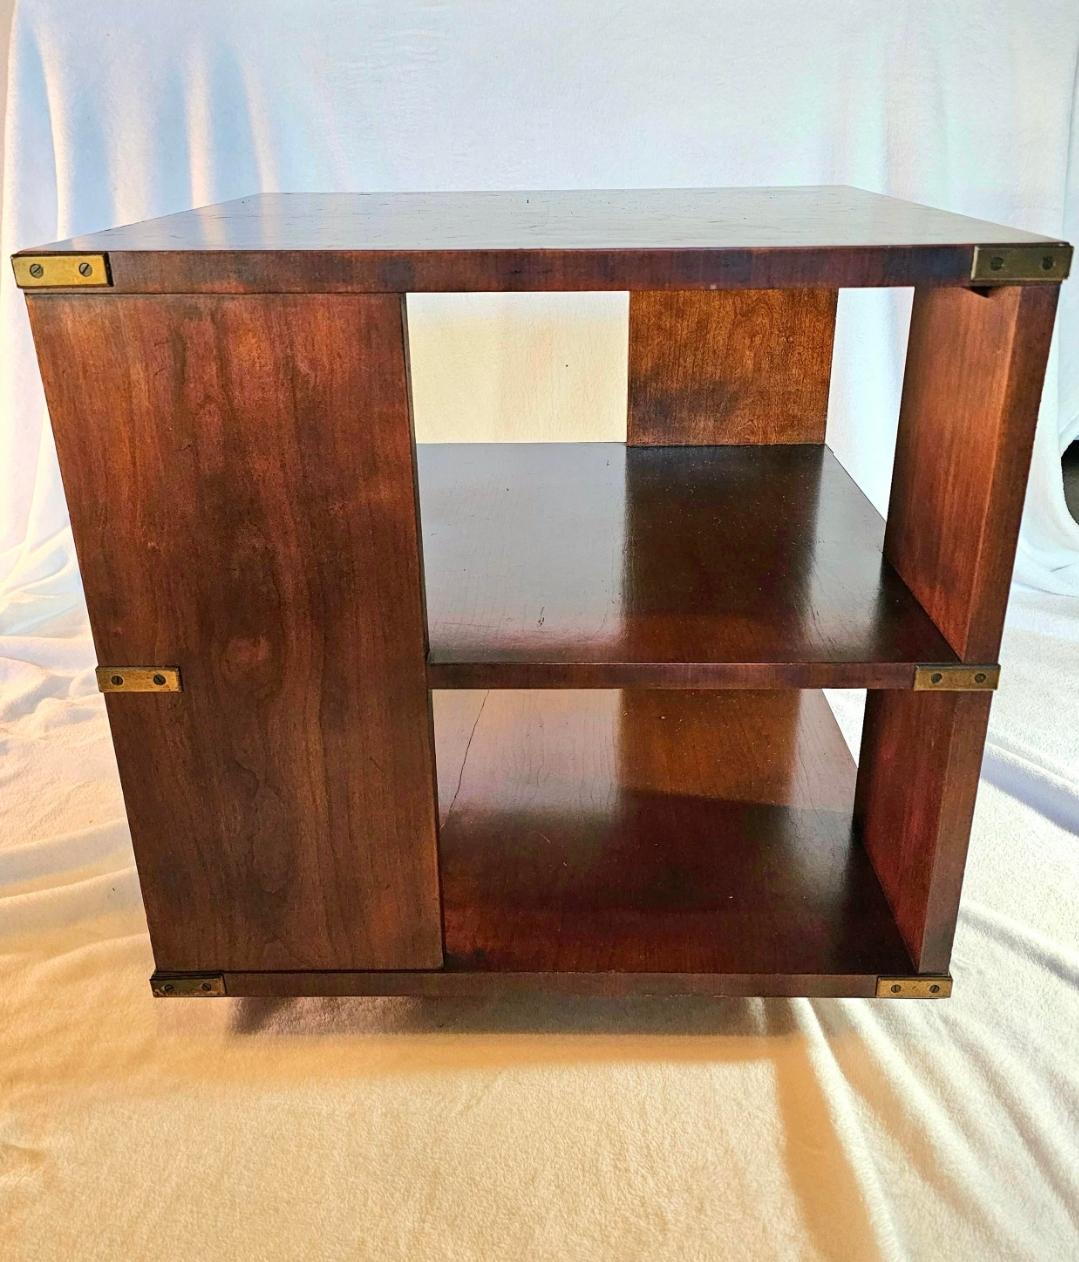 DOB 1970
Rare, I've not been able to find another one.
Thomasville solid wood campaign style revolving bookcase.
Classic campaign brass bands.
Solid wood, no veneers.
Smooth motion in the base.
Perfect cube 22